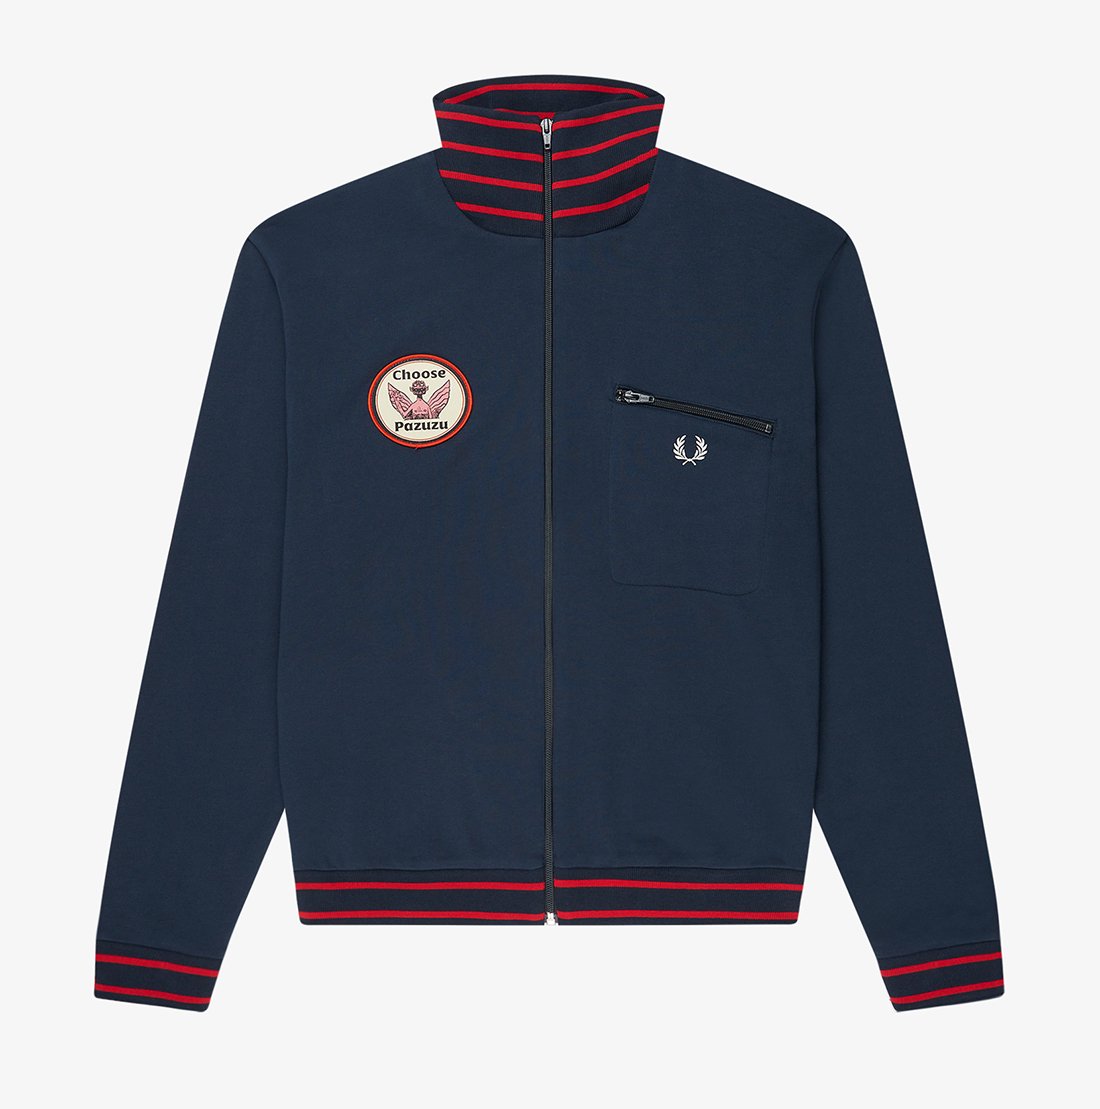 Fred Perry x Gorillaz Collection